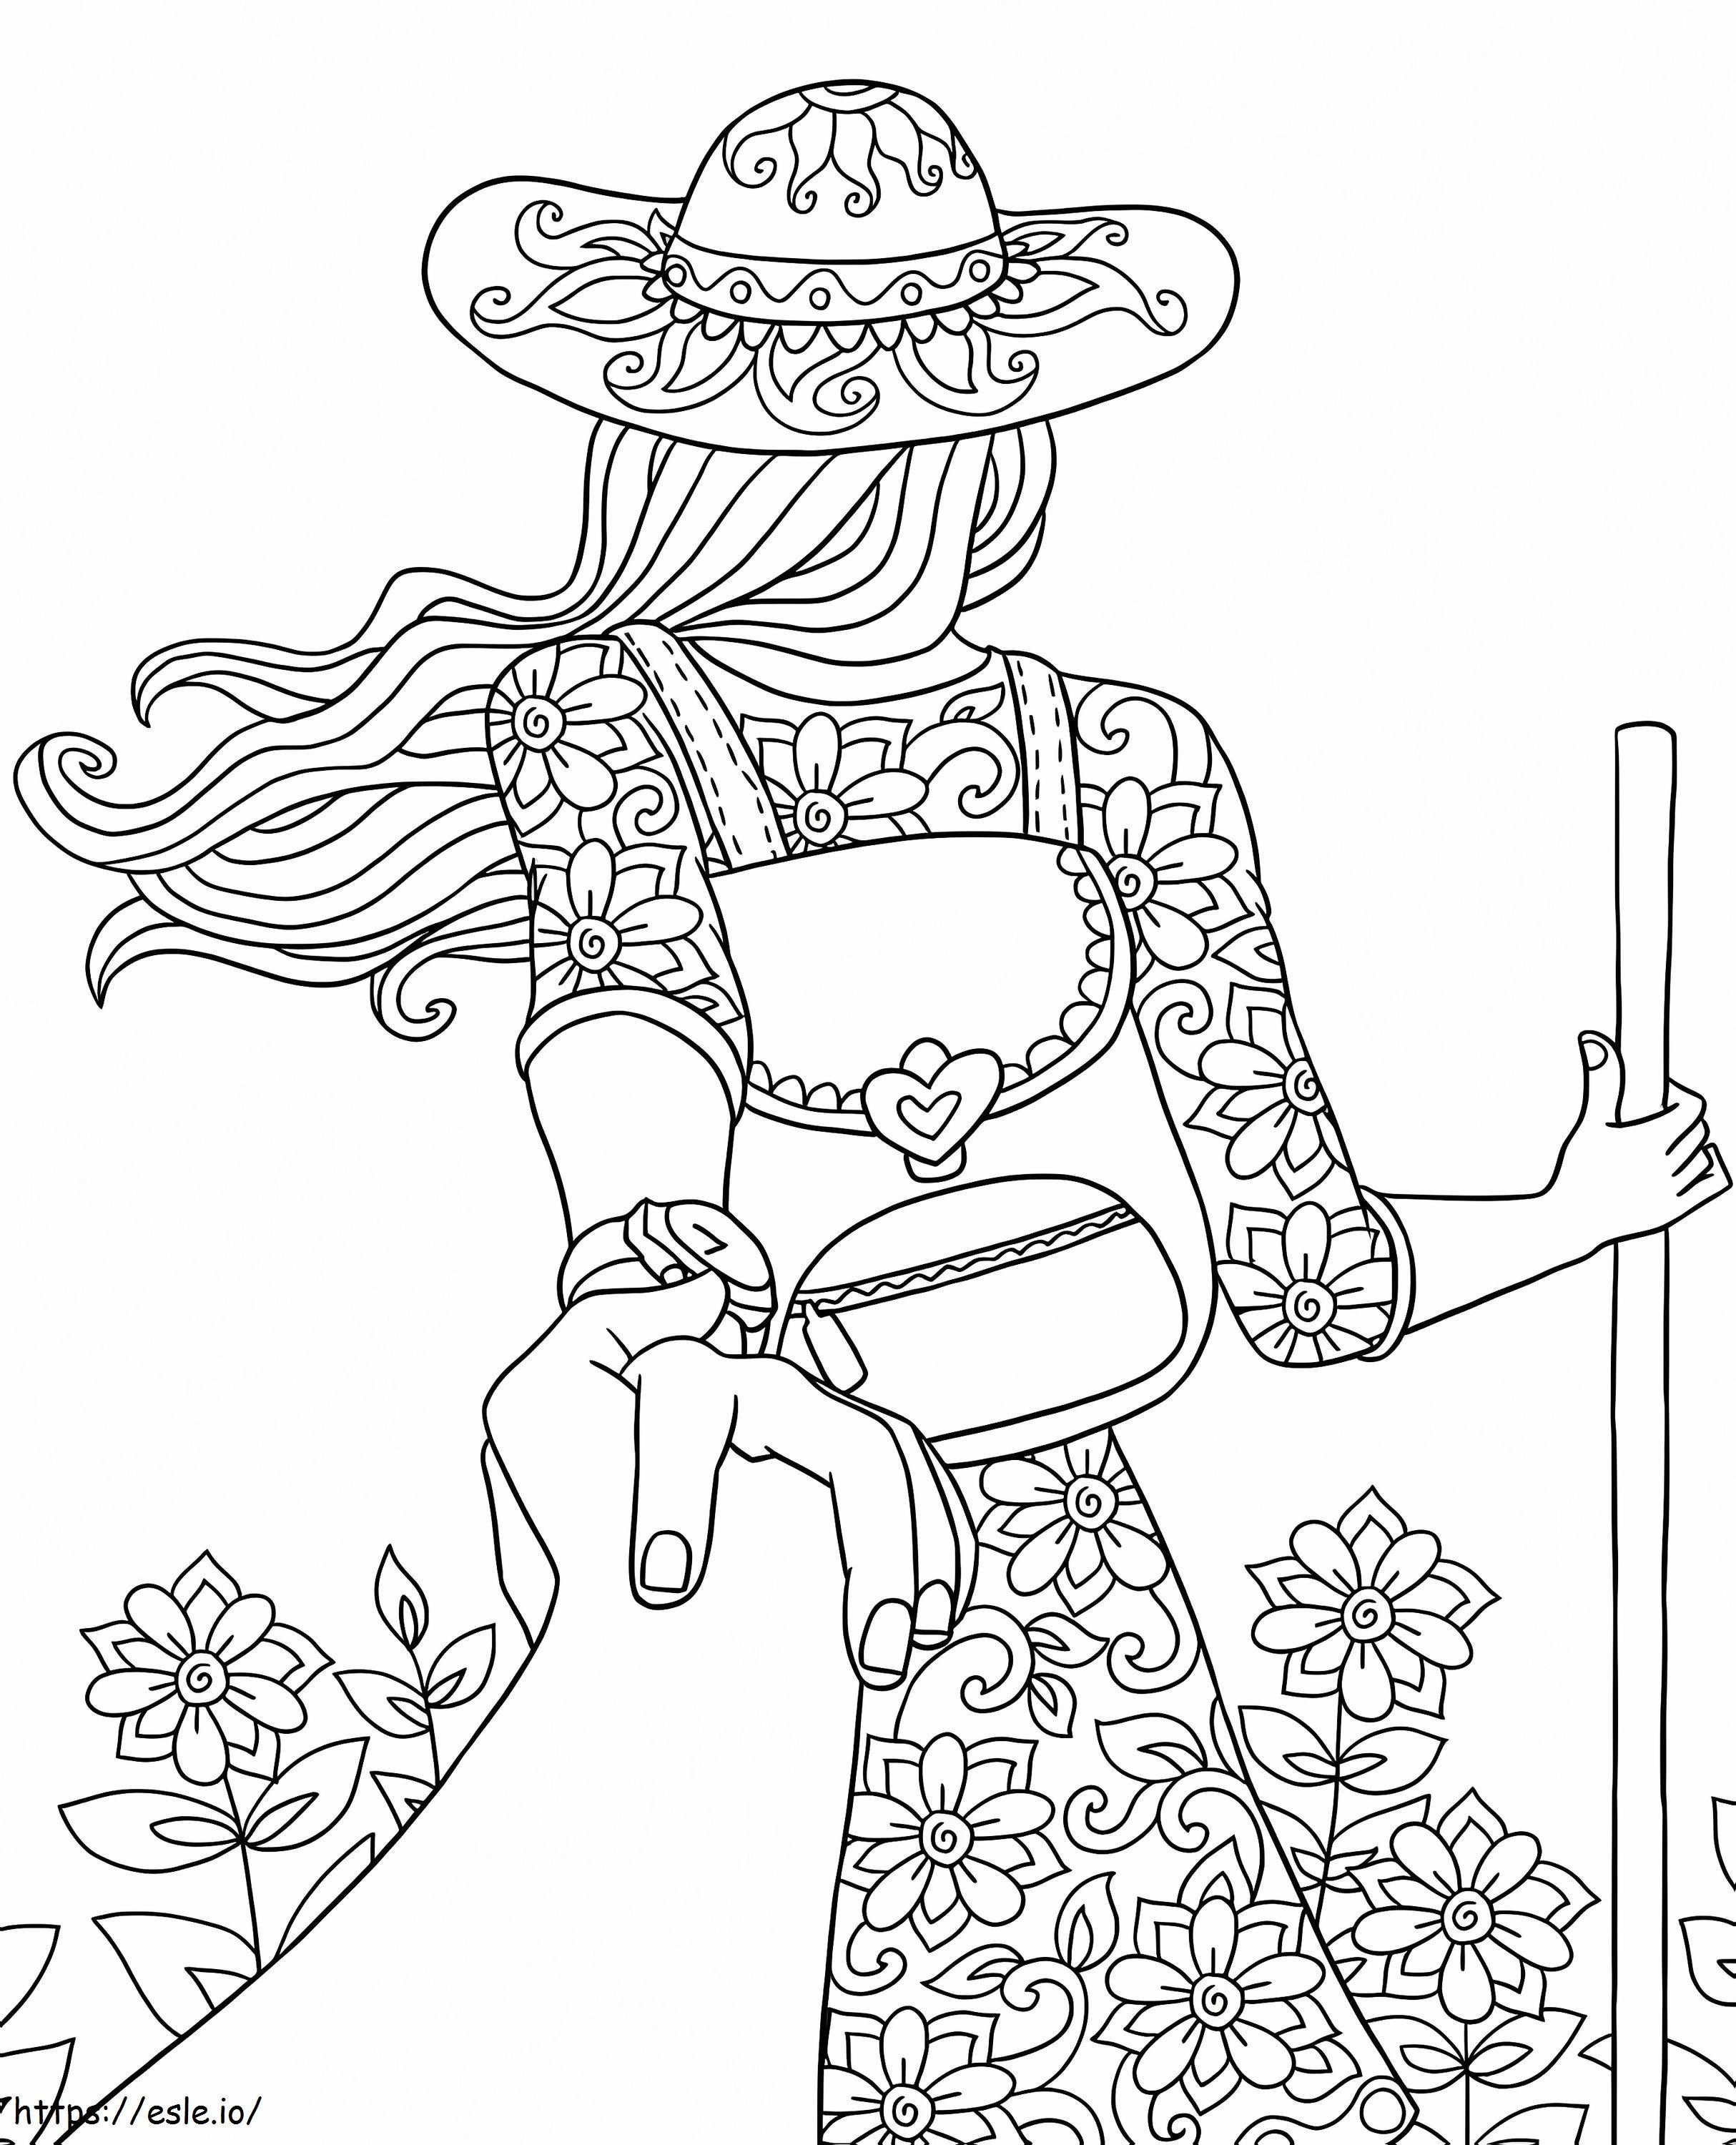 Follow Me coloring page